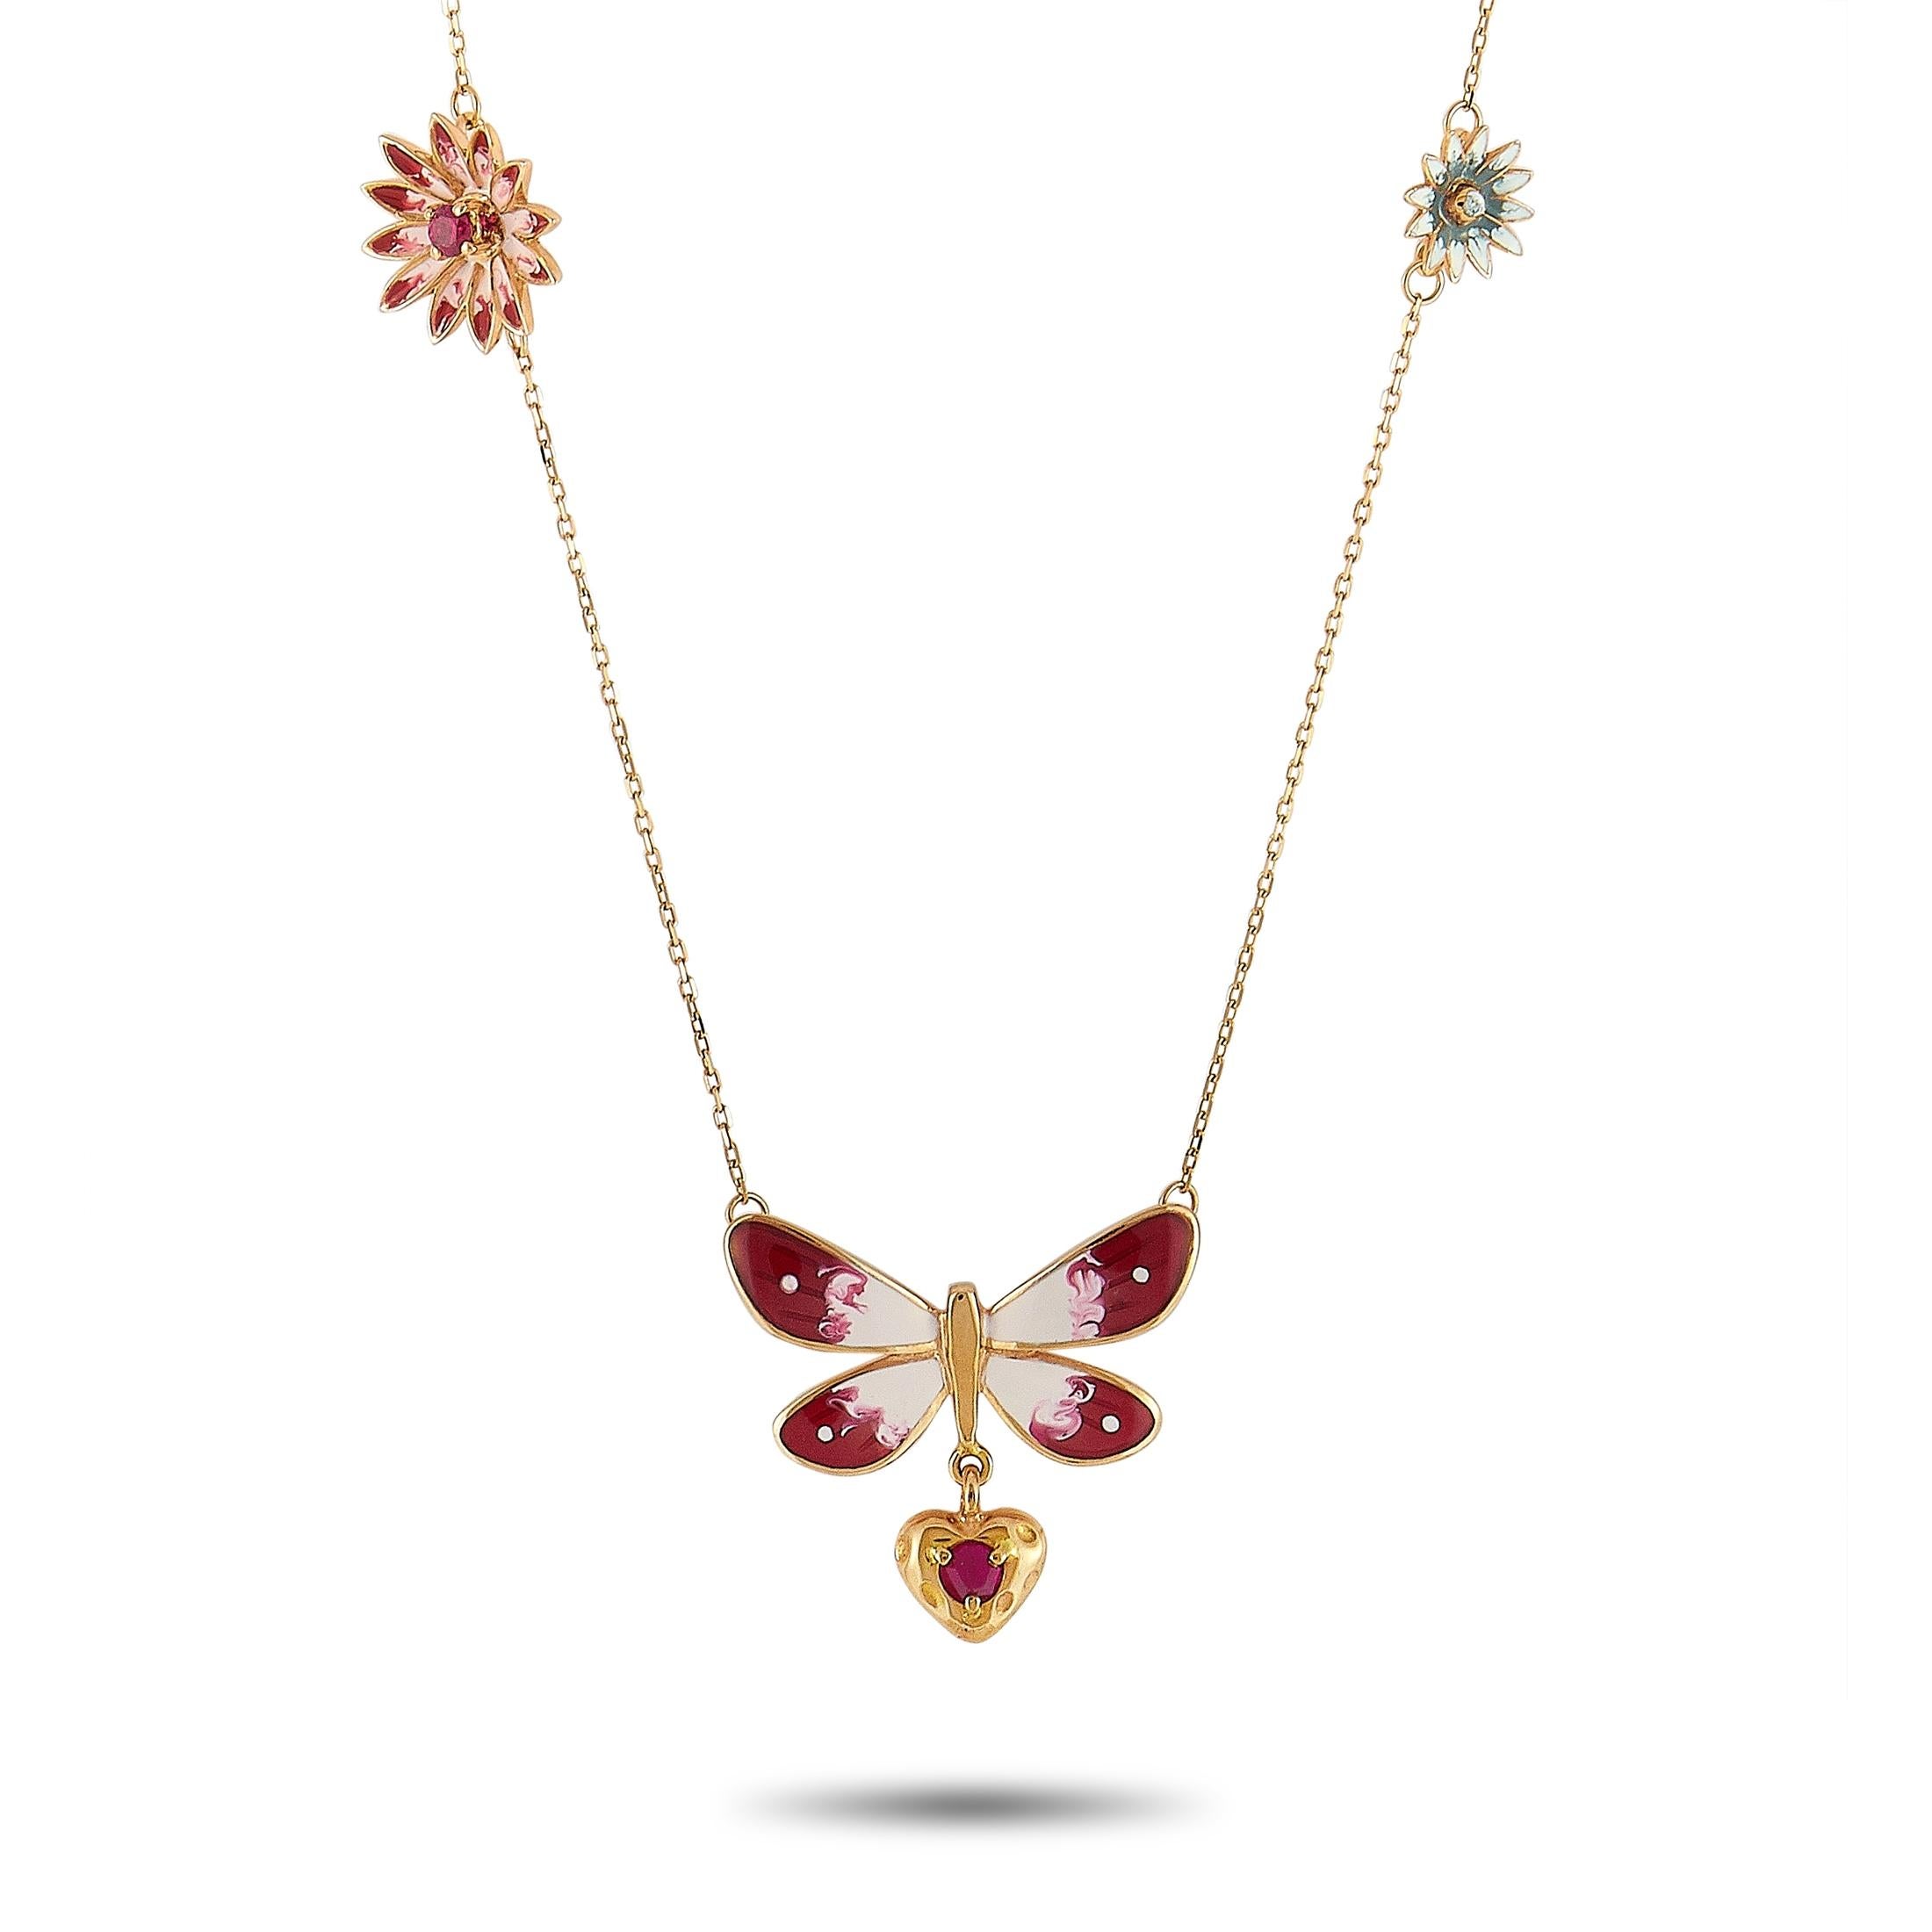 The Gucci “Flora” necklace is made of 18K rose gold and weighs 8 grams. The necklace boasts an 18” chain and a pendant that measures 0.87” in length and 0.87” in width.

This jewelry piece is offered in brand new condition and includes the